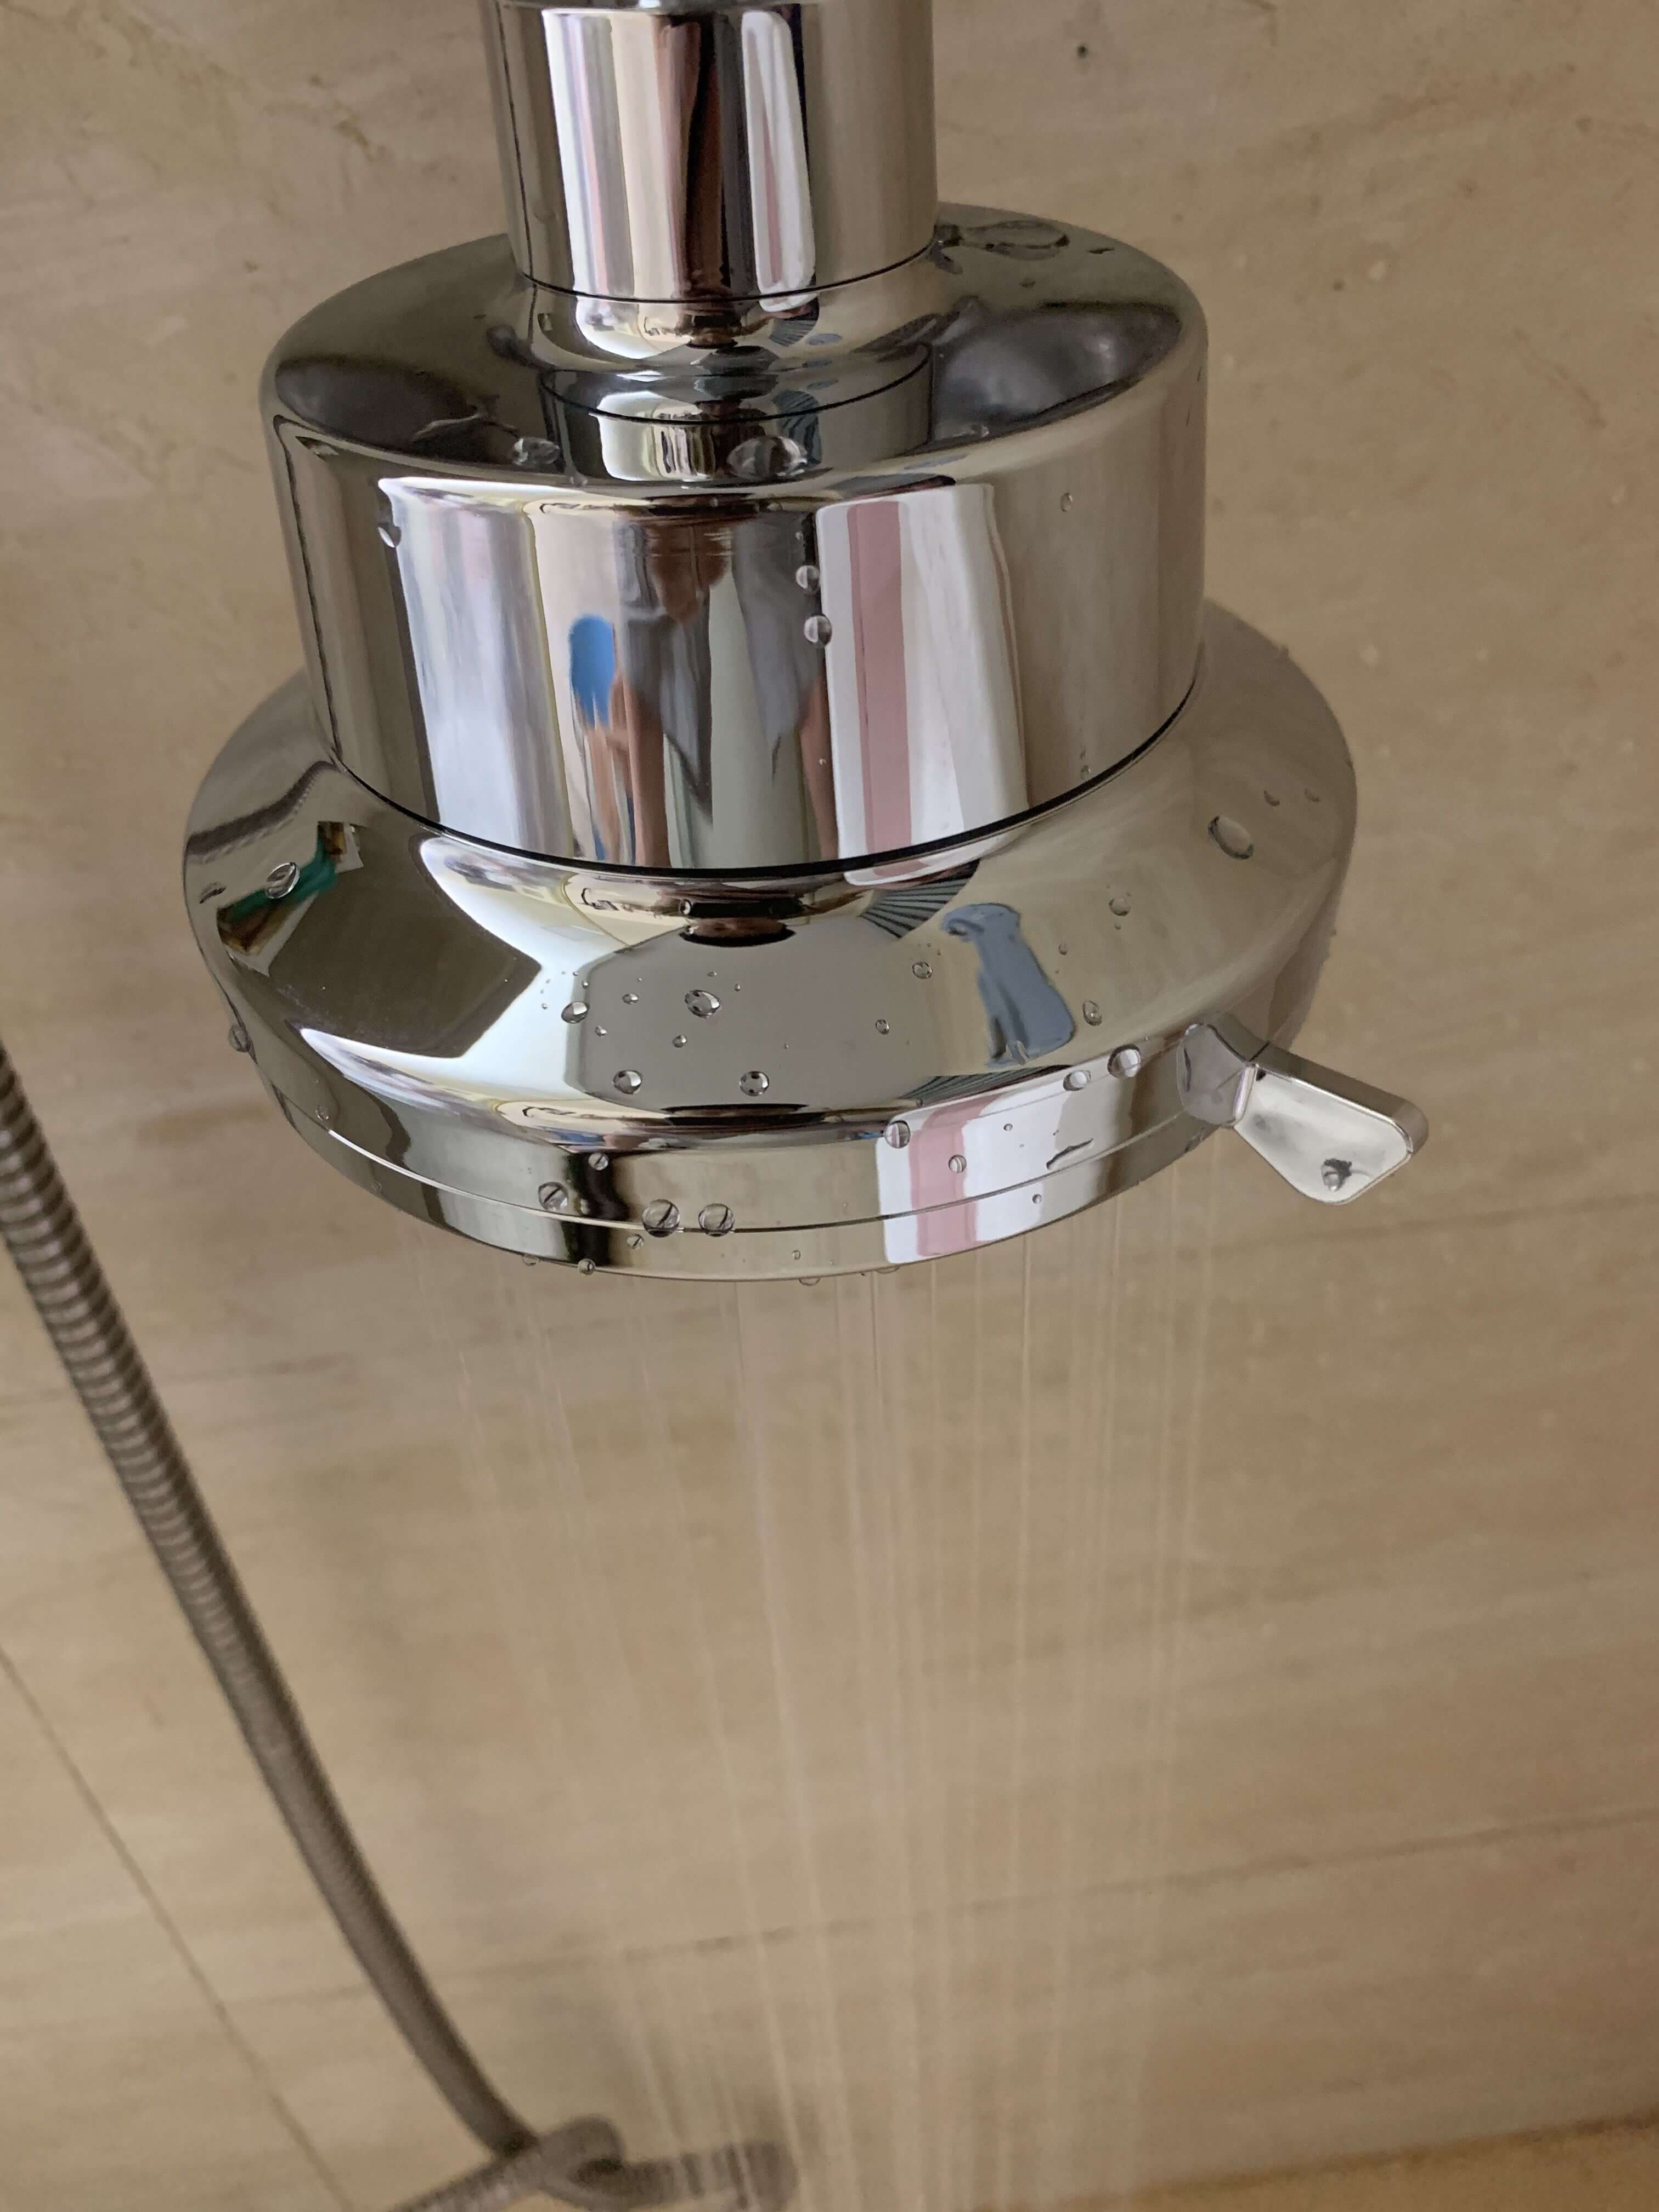 Shower Head With Filter for Hard Water